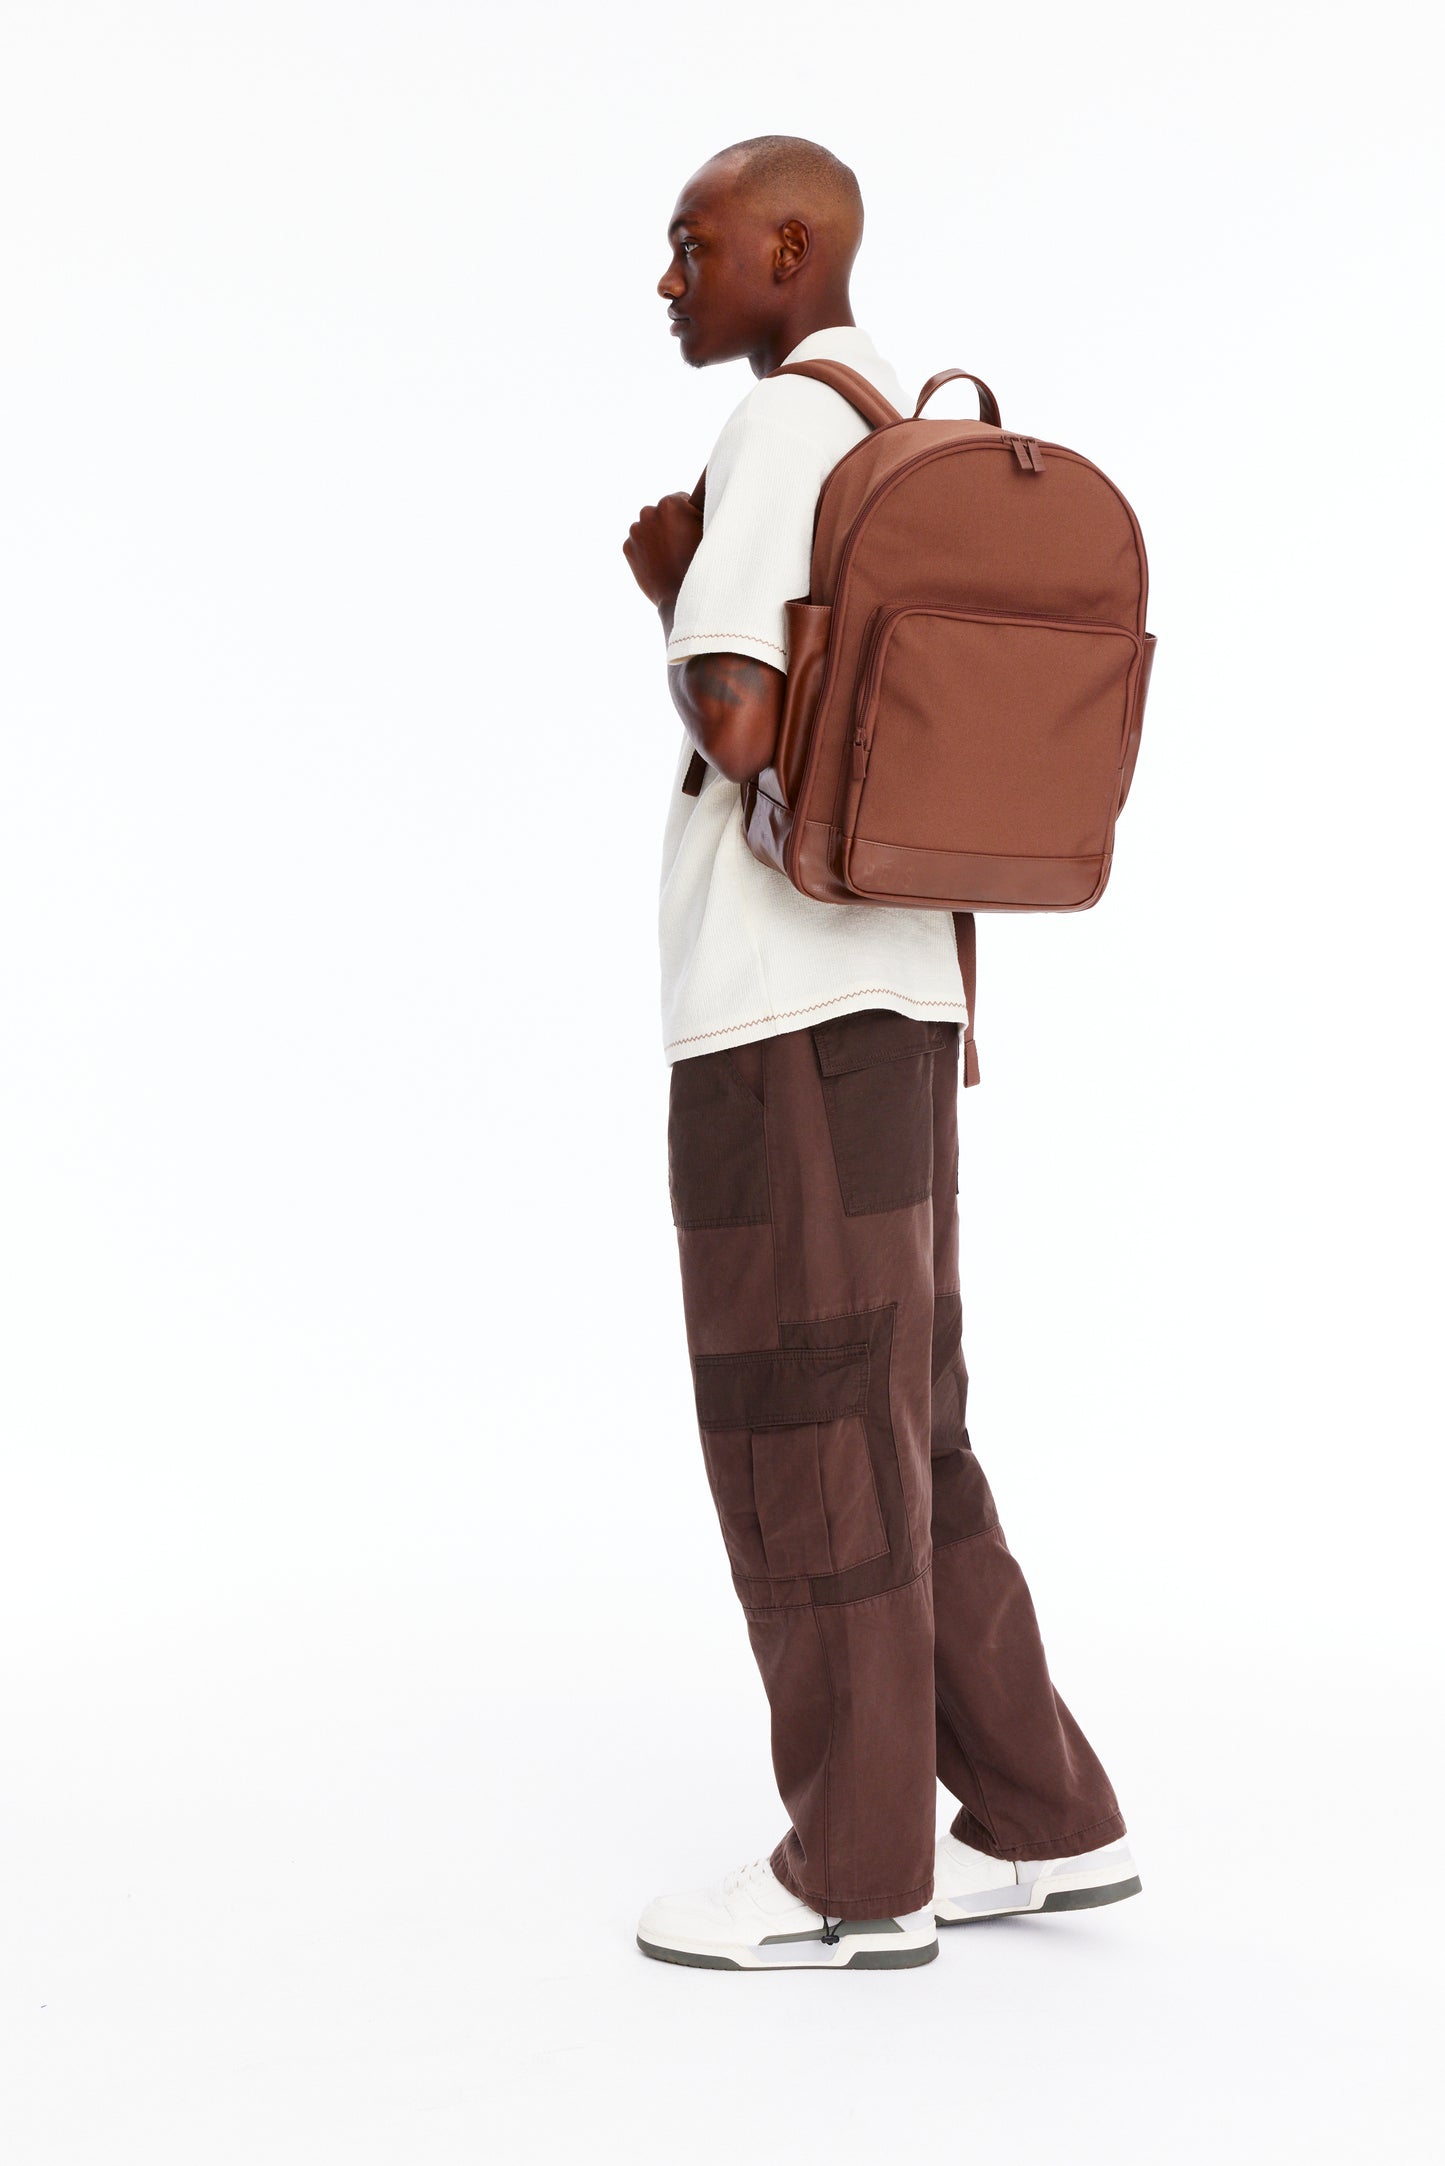 BÉIS 'The Backpack' in Maple - Brown Laptop Backpack For Work & Travel